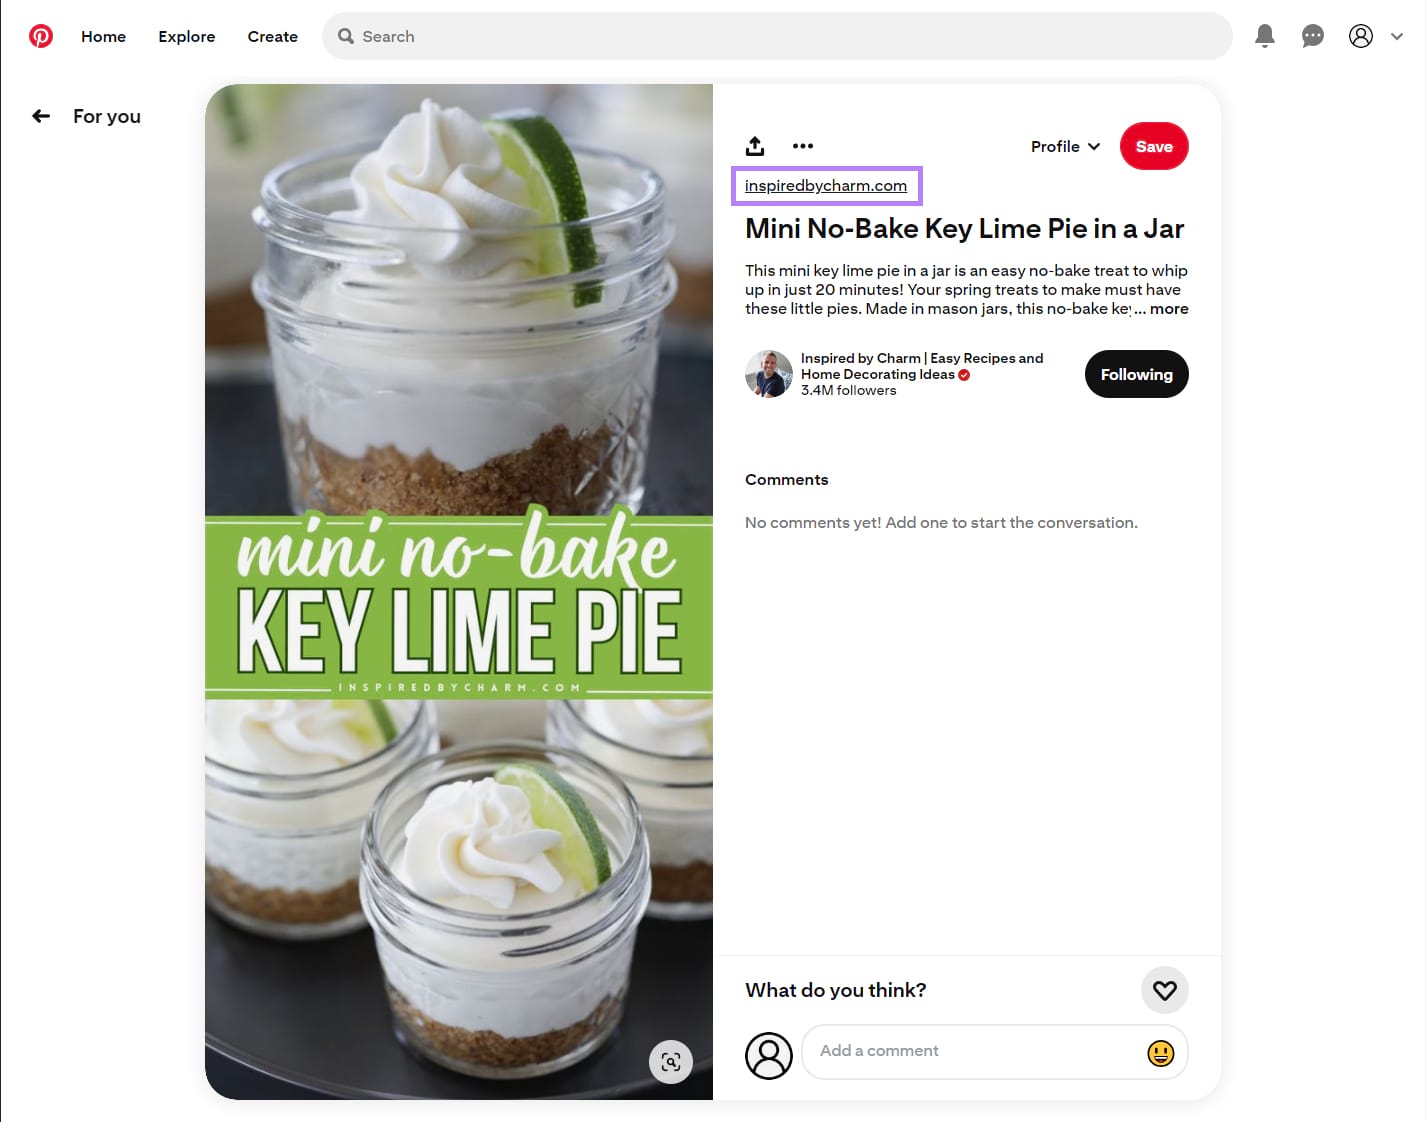 Pinterest Pin for a key lime pie recipe showing the link to the account's website.